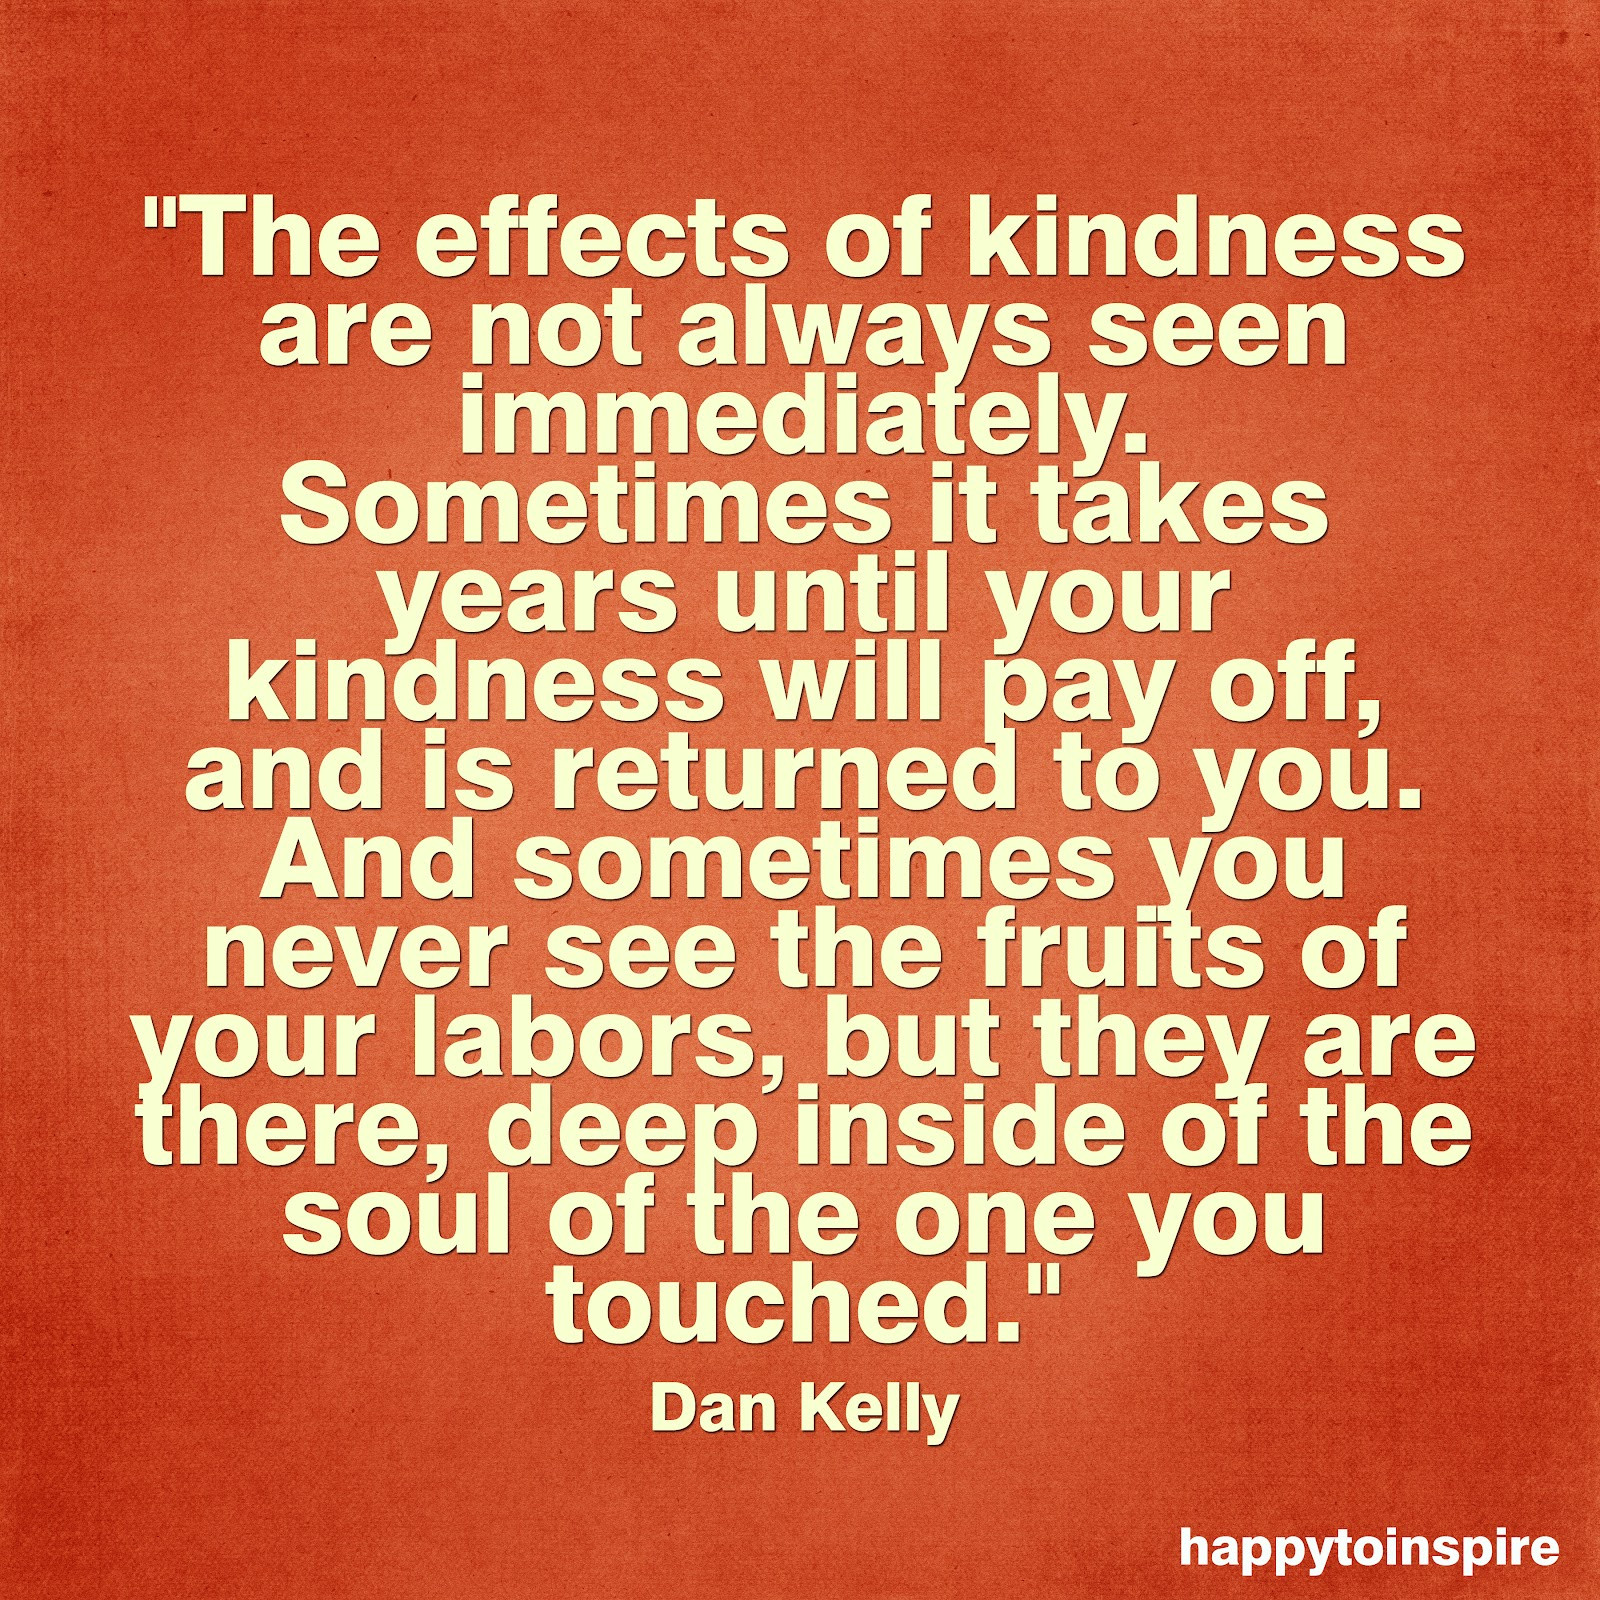 Quote On Kindness
 Happy To Inspire Quote of the Day The effects of